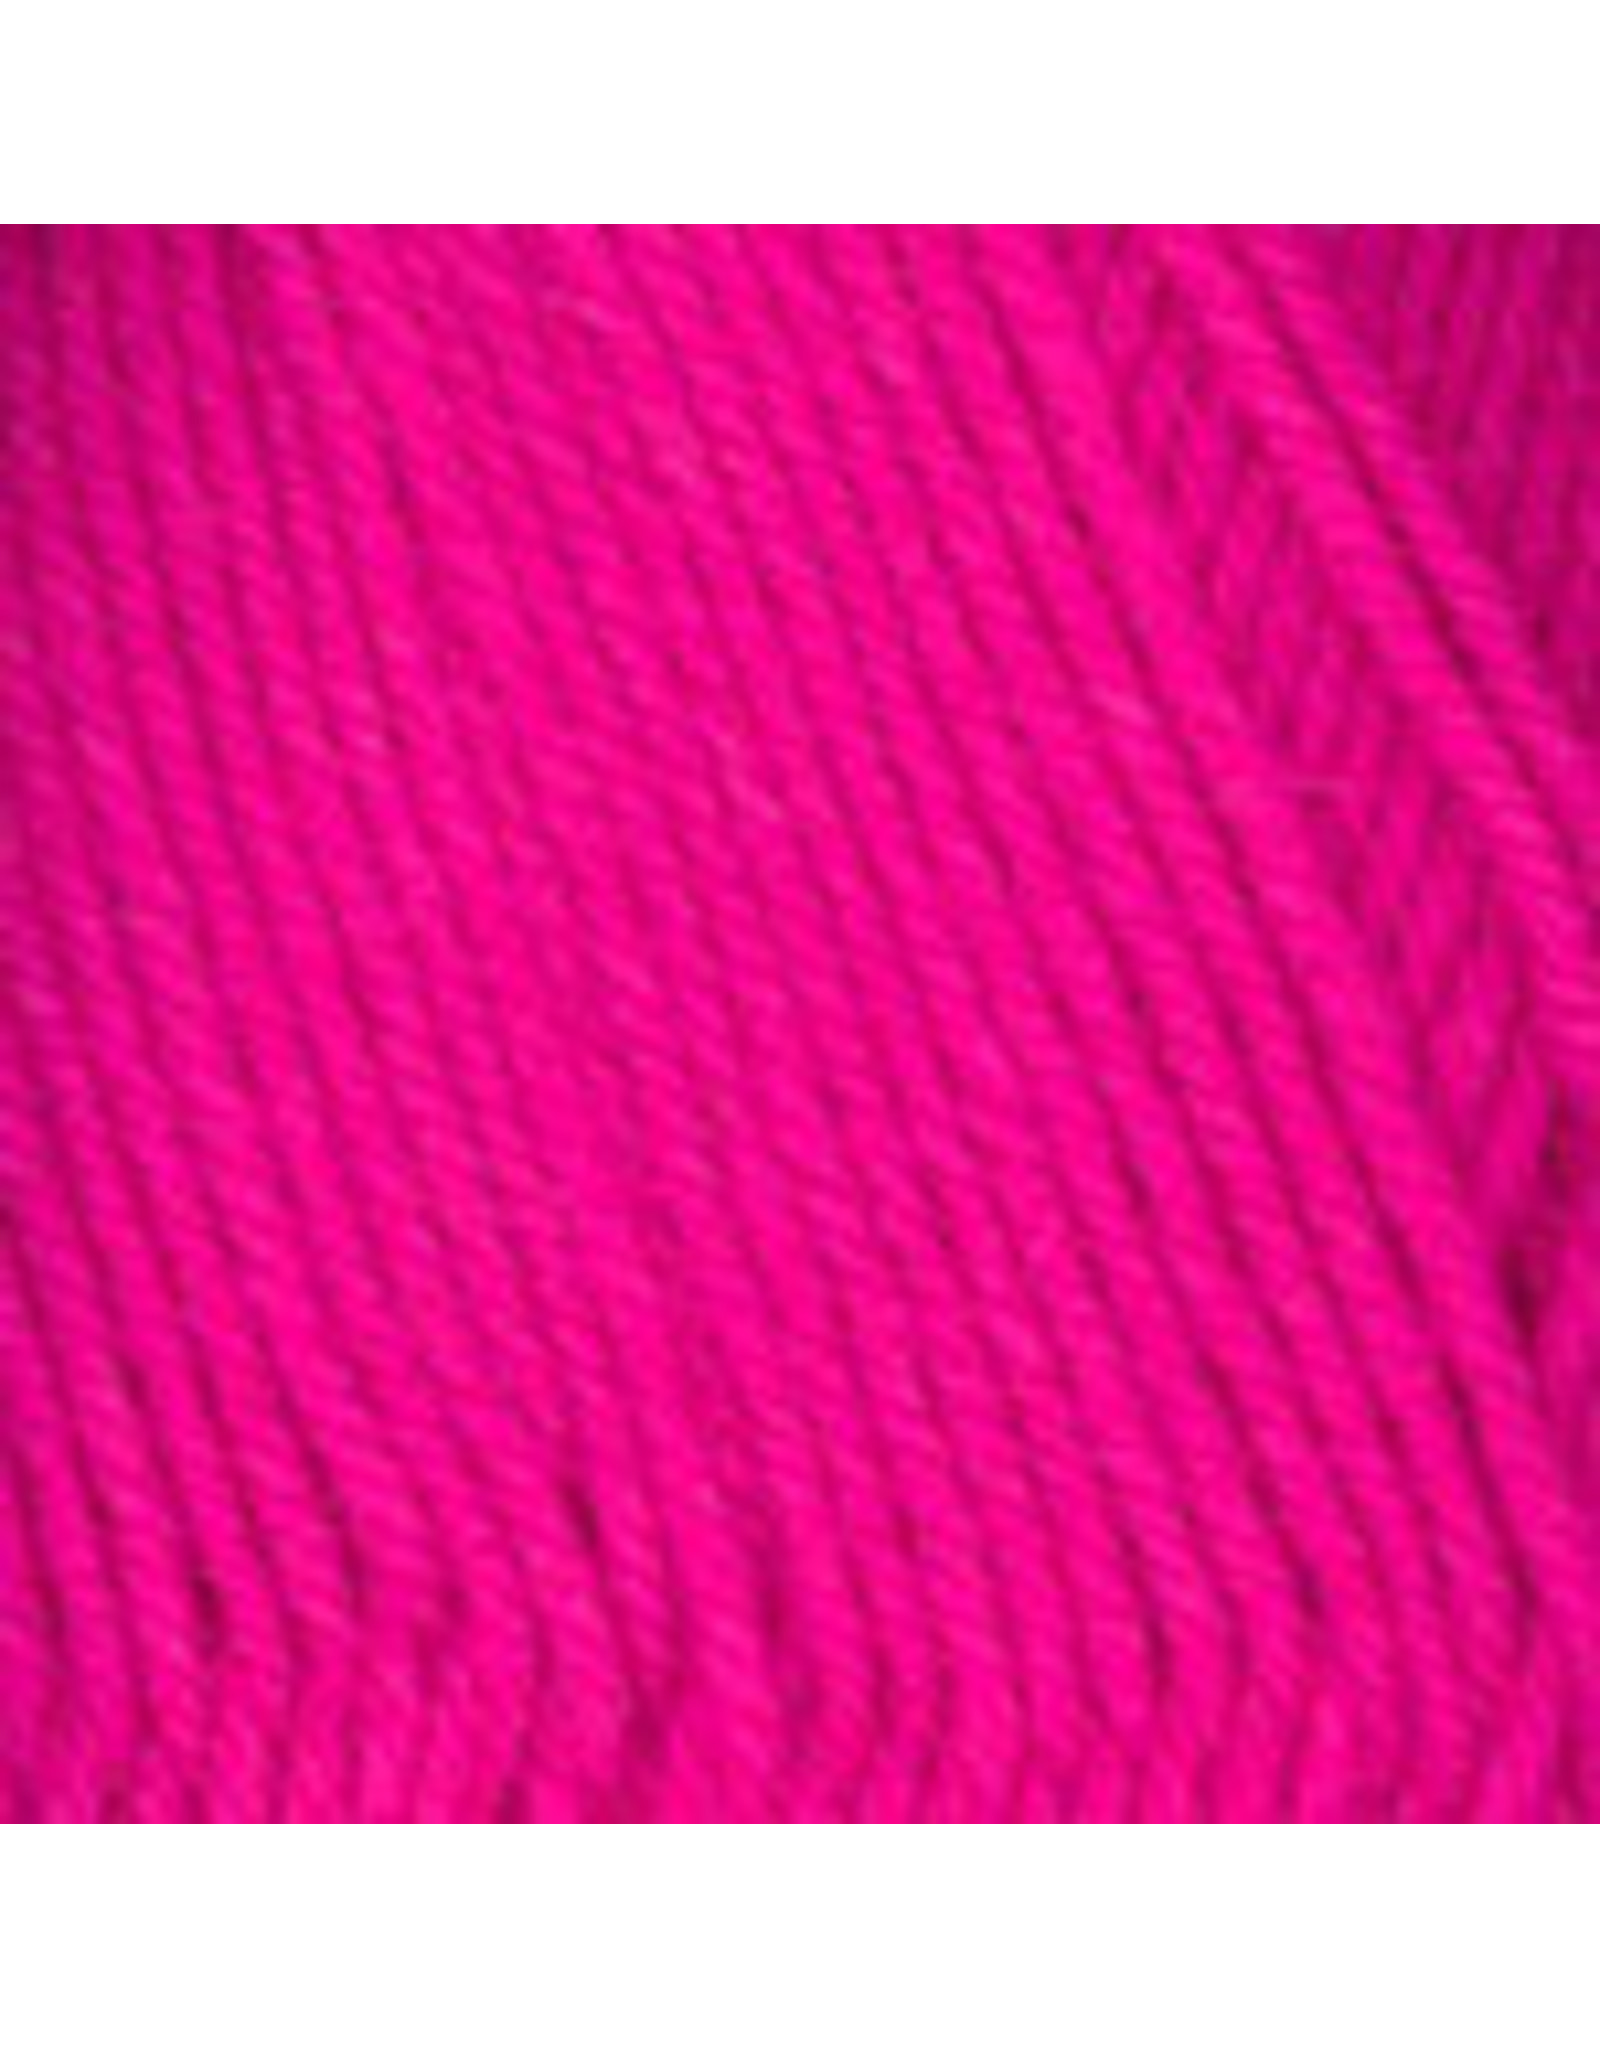 Plymouth Yarn Plymouth: Dreambaby DK, (Pinks/Reds/Lav)